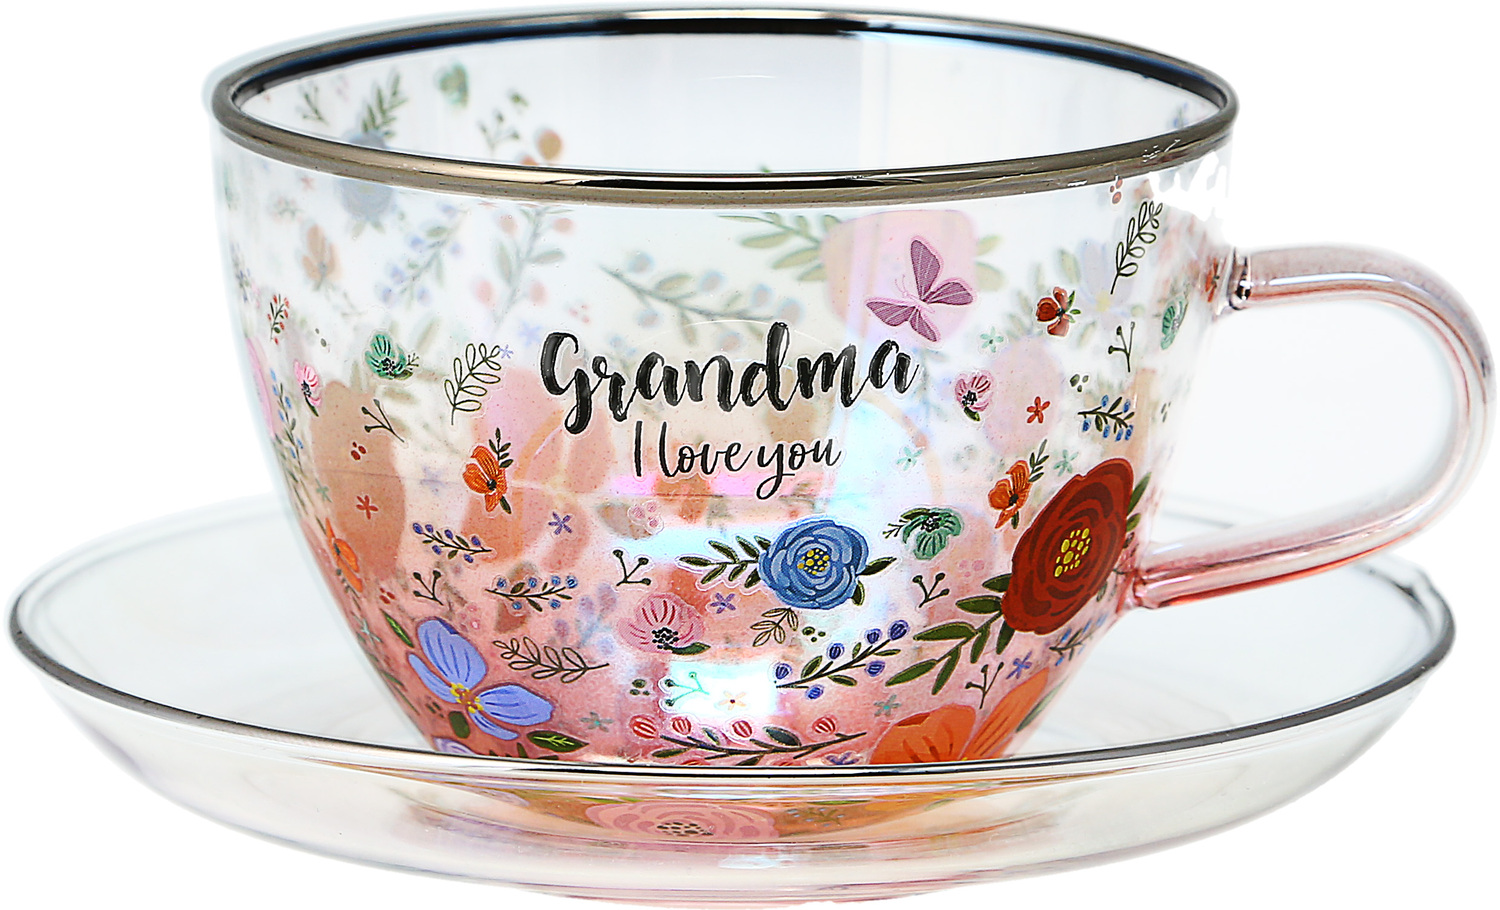 Grandma by Bunches of Love - Grandma - 7 oz Glass Tea Cup and Saucer